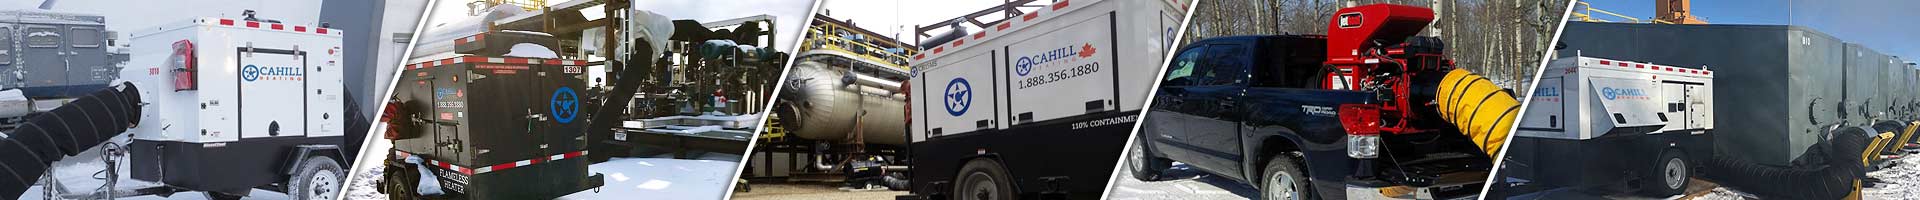 Cahill Services - montage of industrial heaters